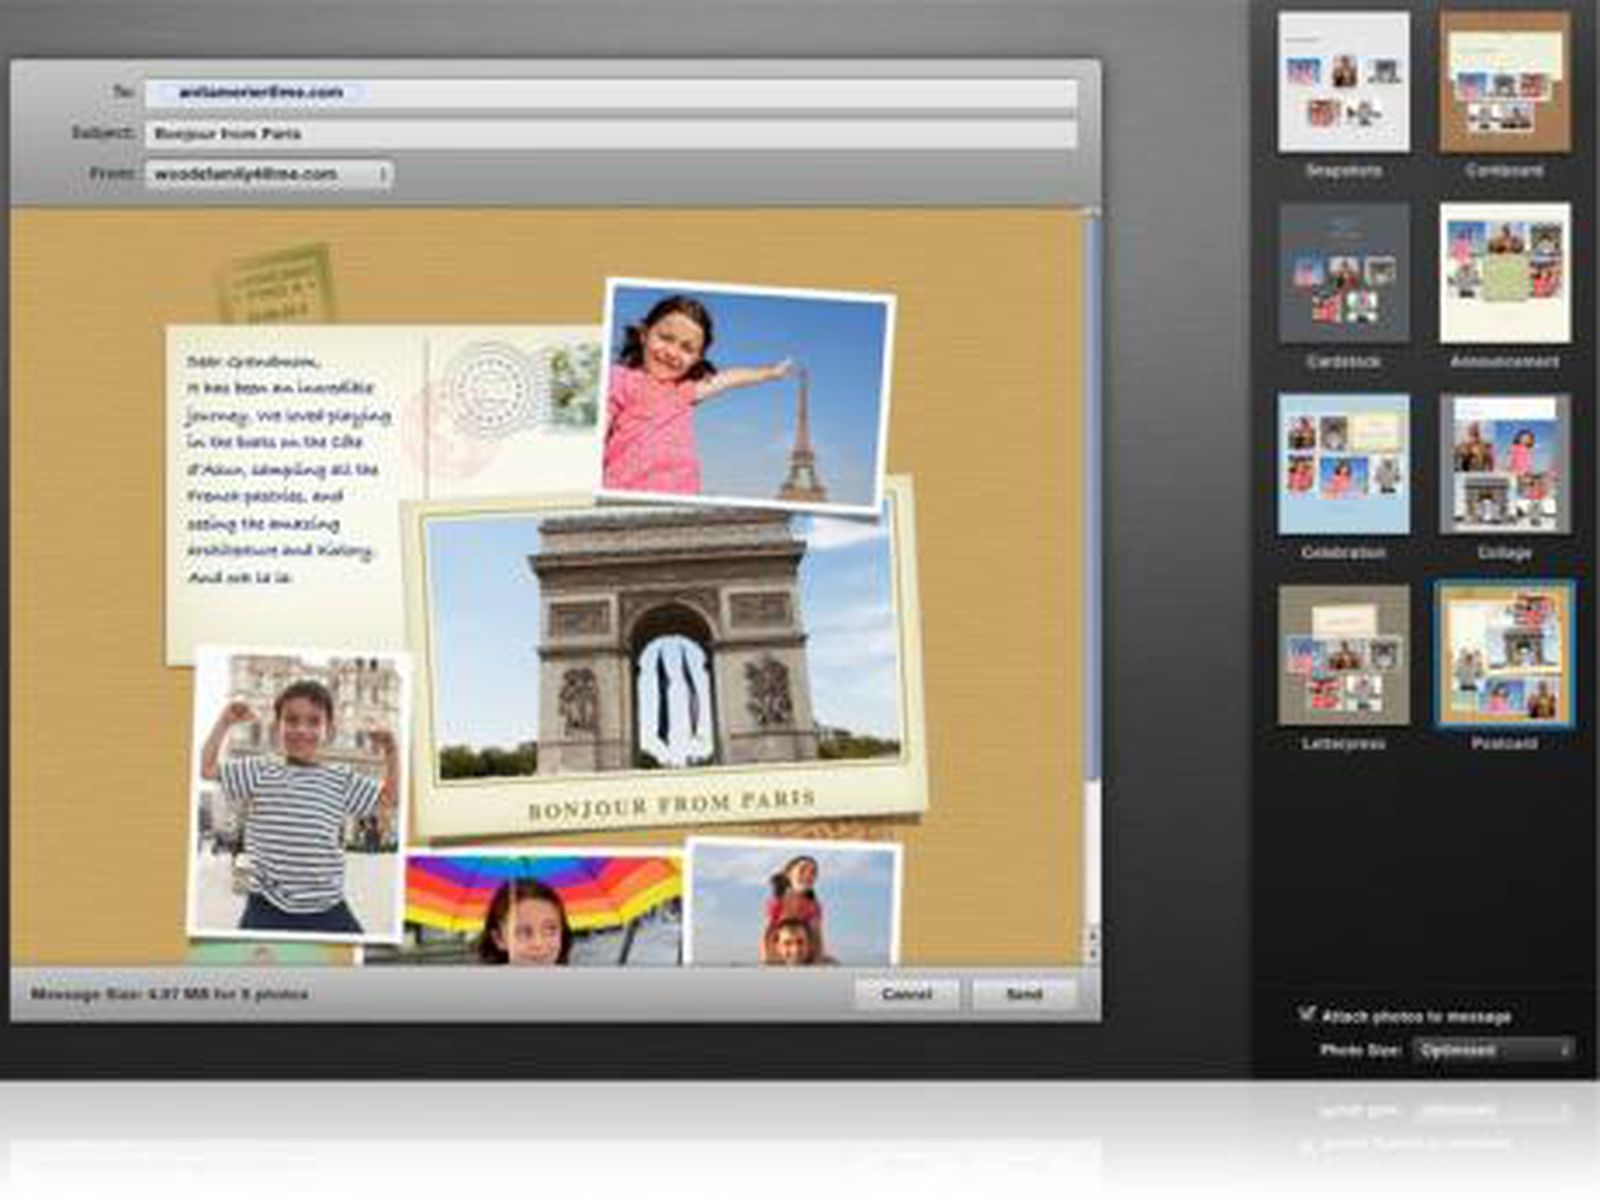 iphoto 9.1 download for mac